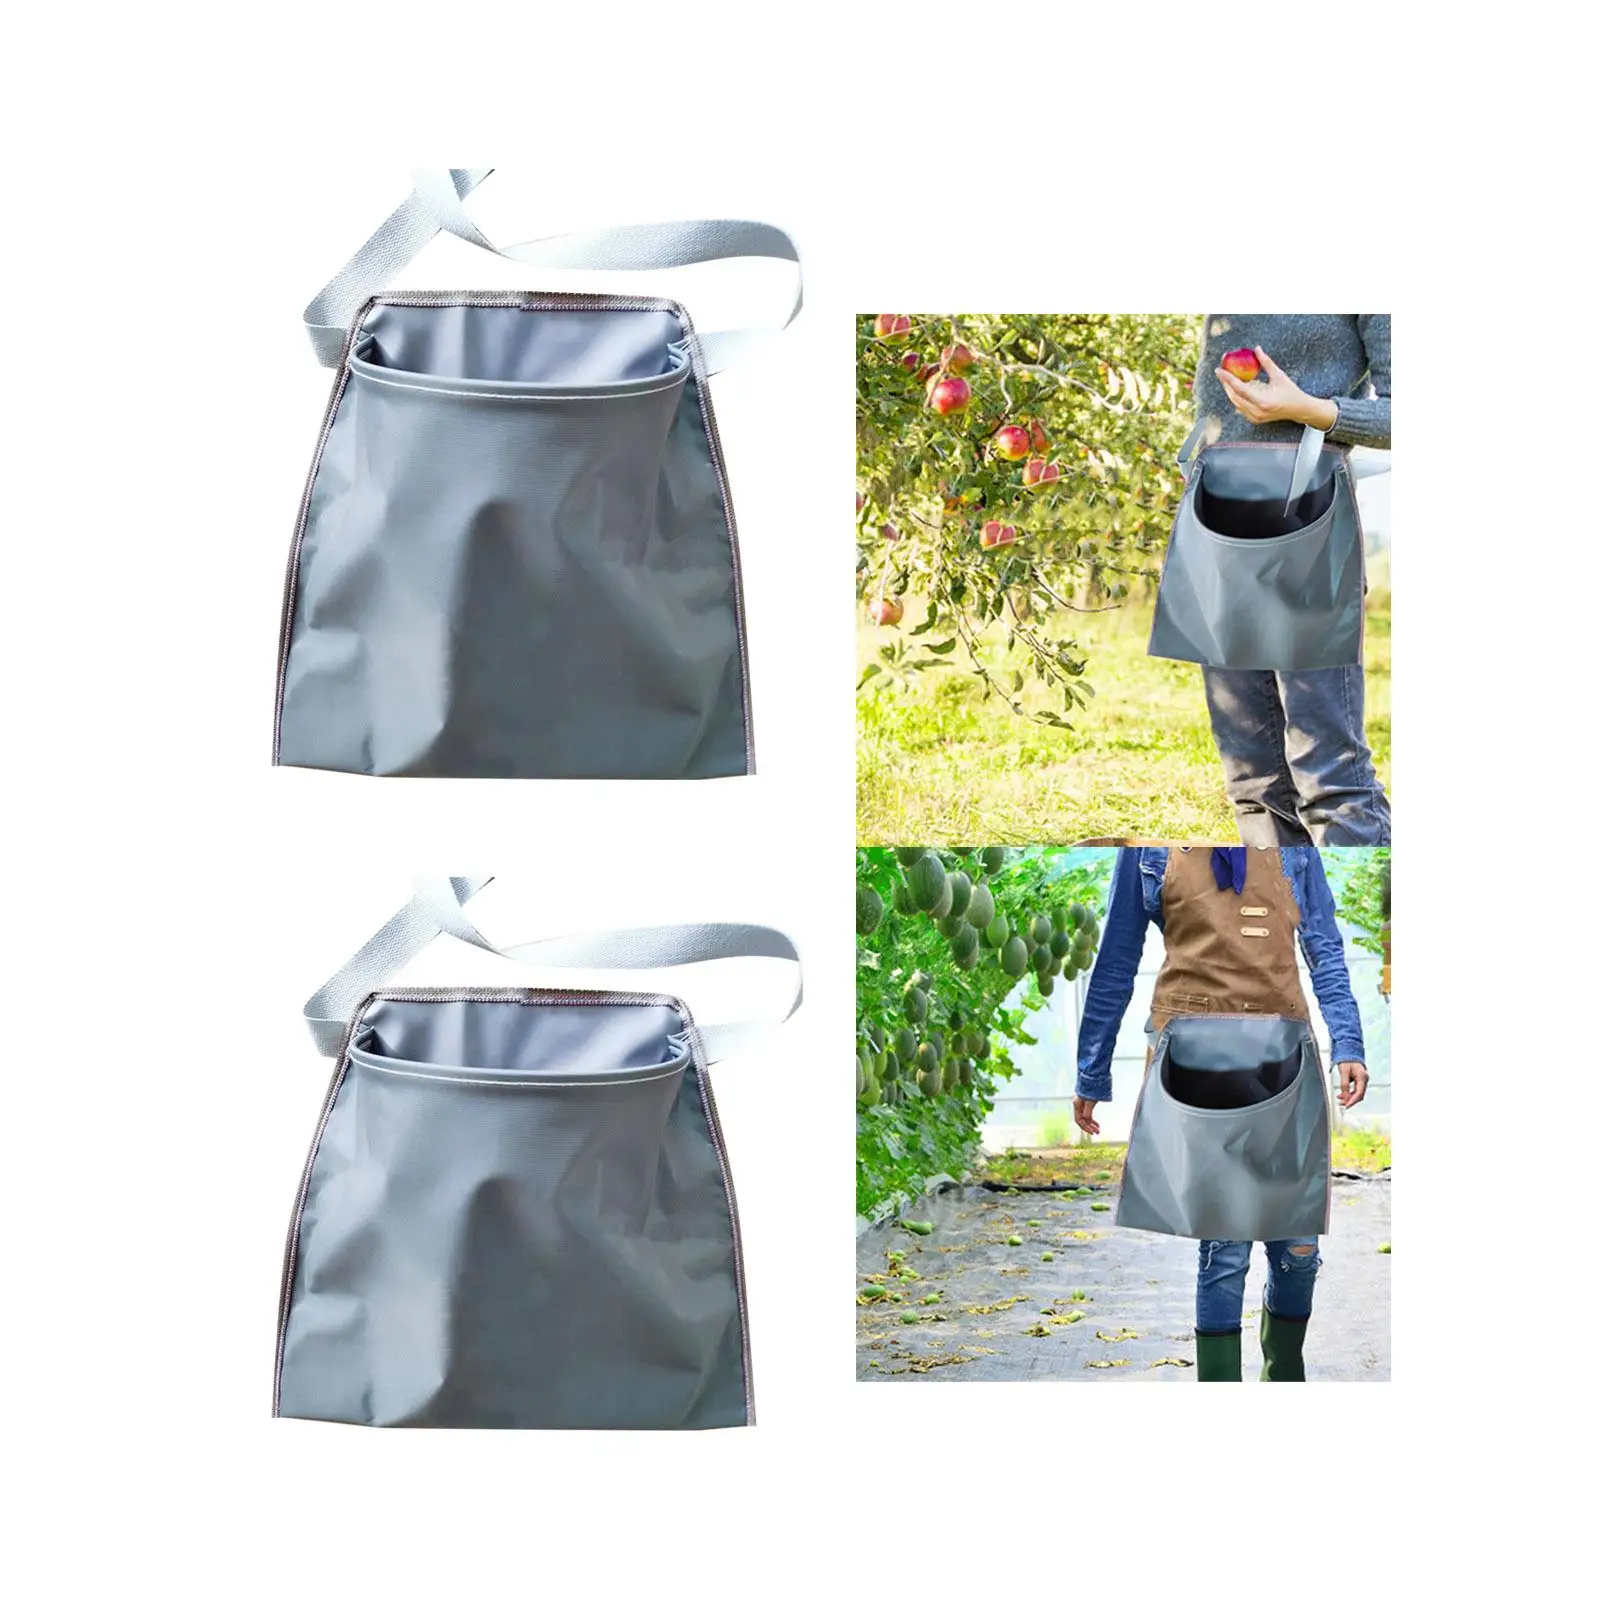 Agricultural Picking Bag Reusable Grocery Bag Heavy Duty Fruit Storage Apron Pouch for Hunting Garden Vegetable Orchard